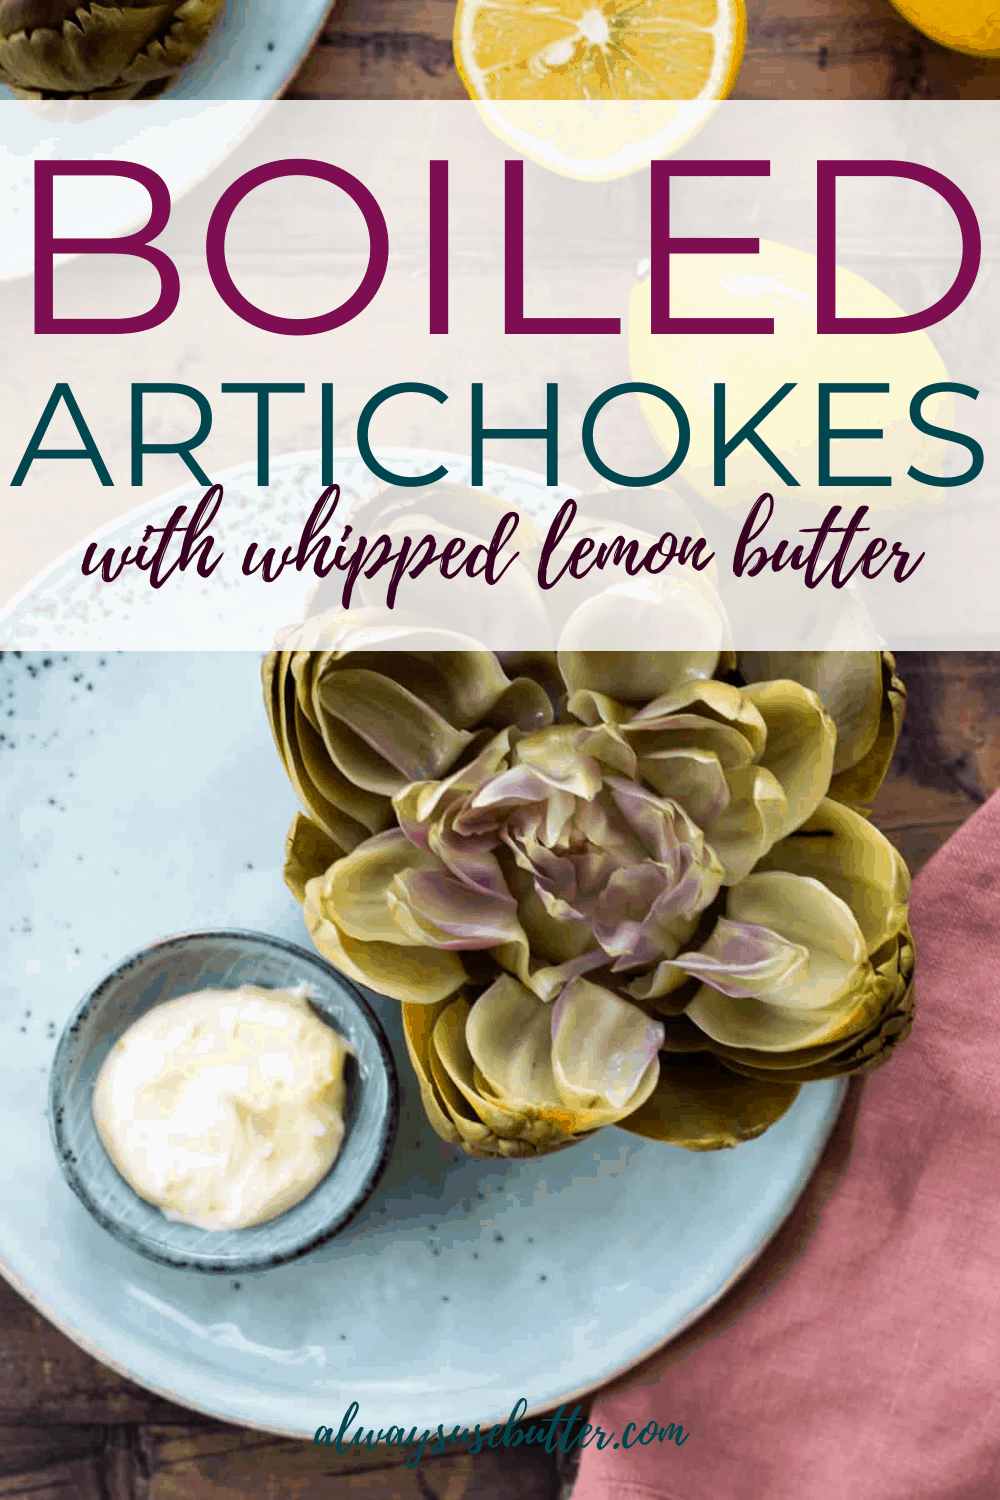 Boiled Artichokes with Whipped Lemon Butter